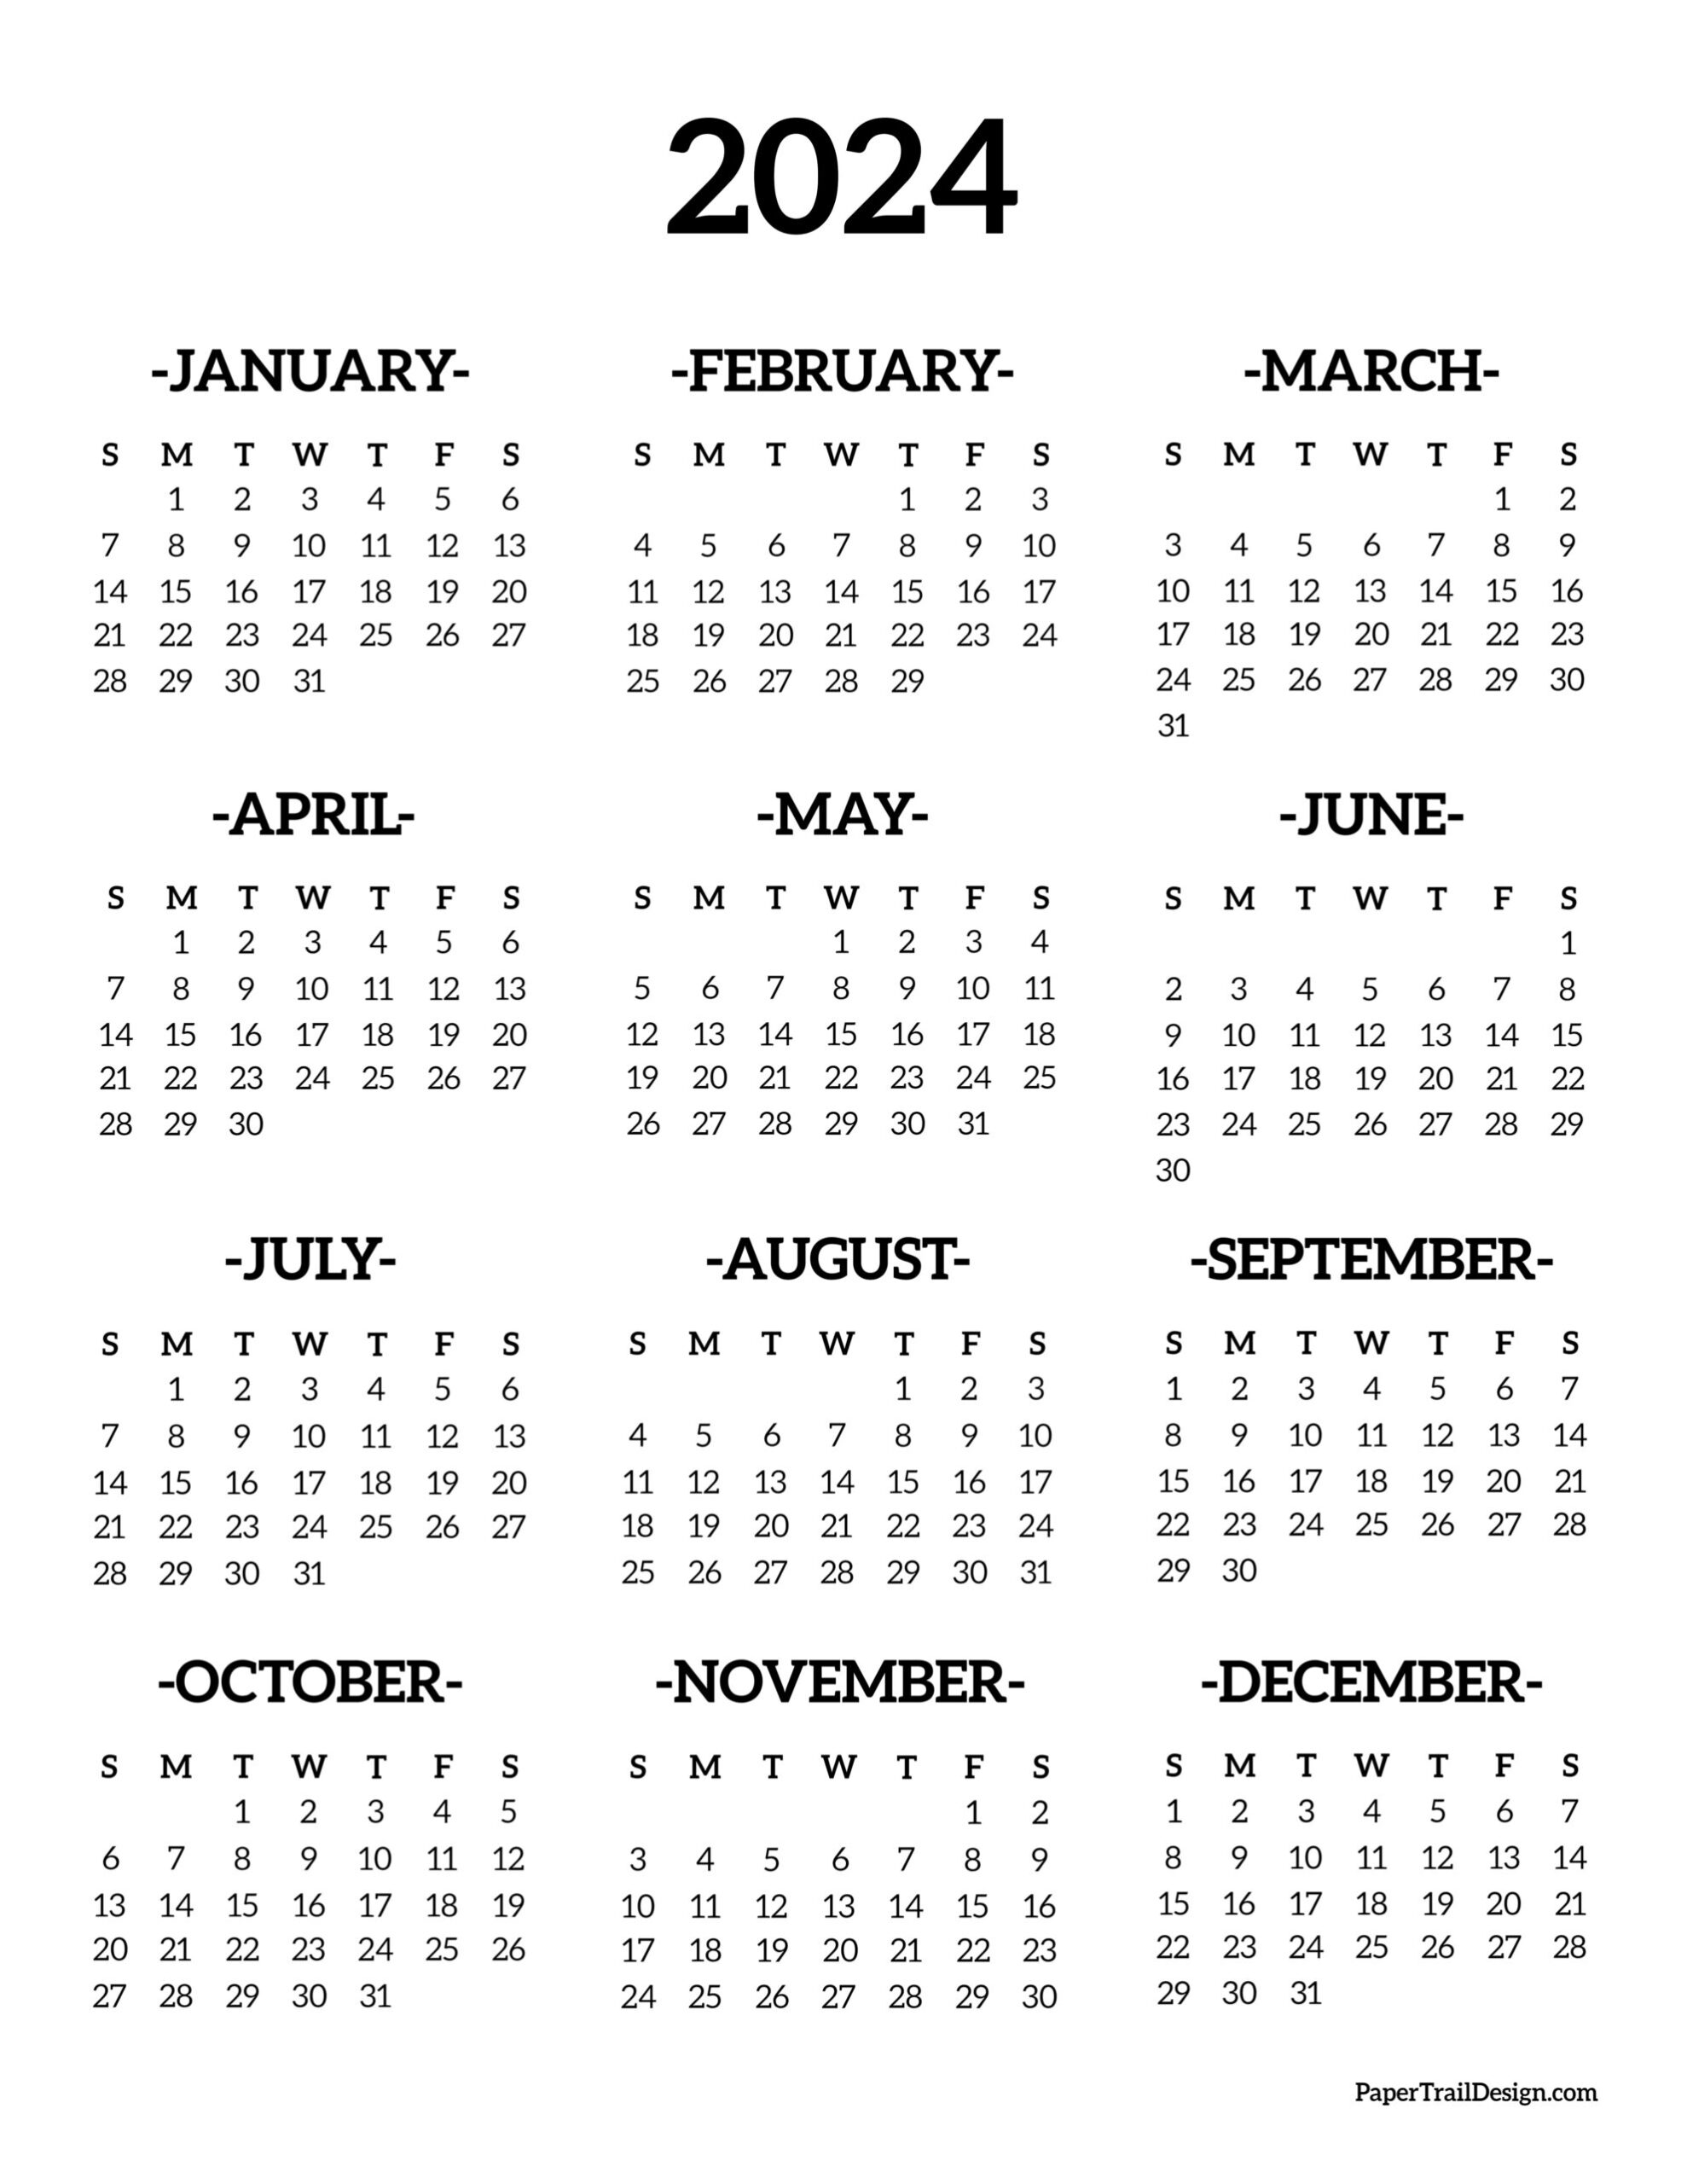 Calendar 2024 Printable One Page - Paper Trail Design for 2024 Year Free Printable Calendar